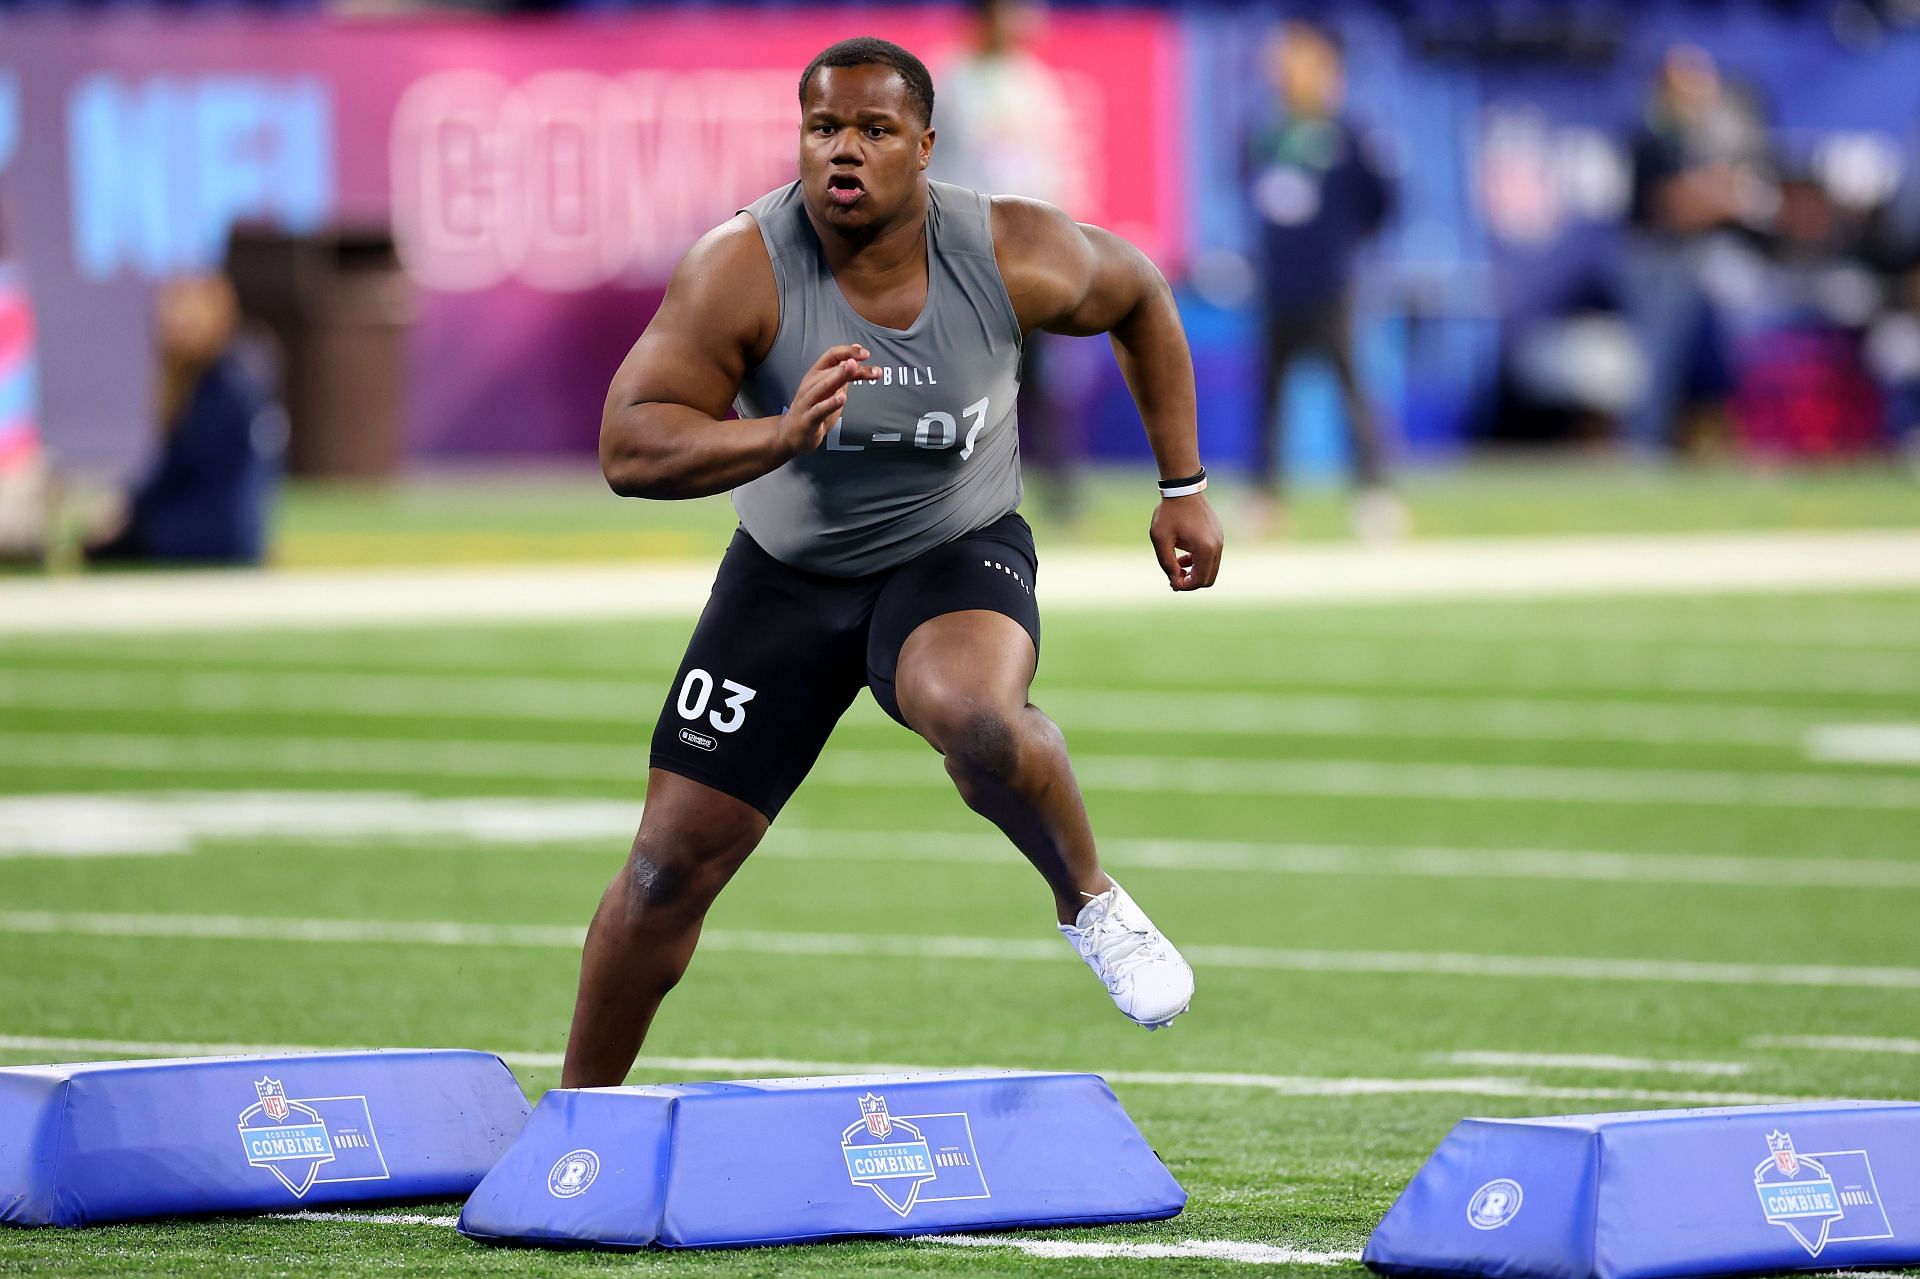 Tyler Davis #DL03 of Clemson participates in a drill during the NFL Combine